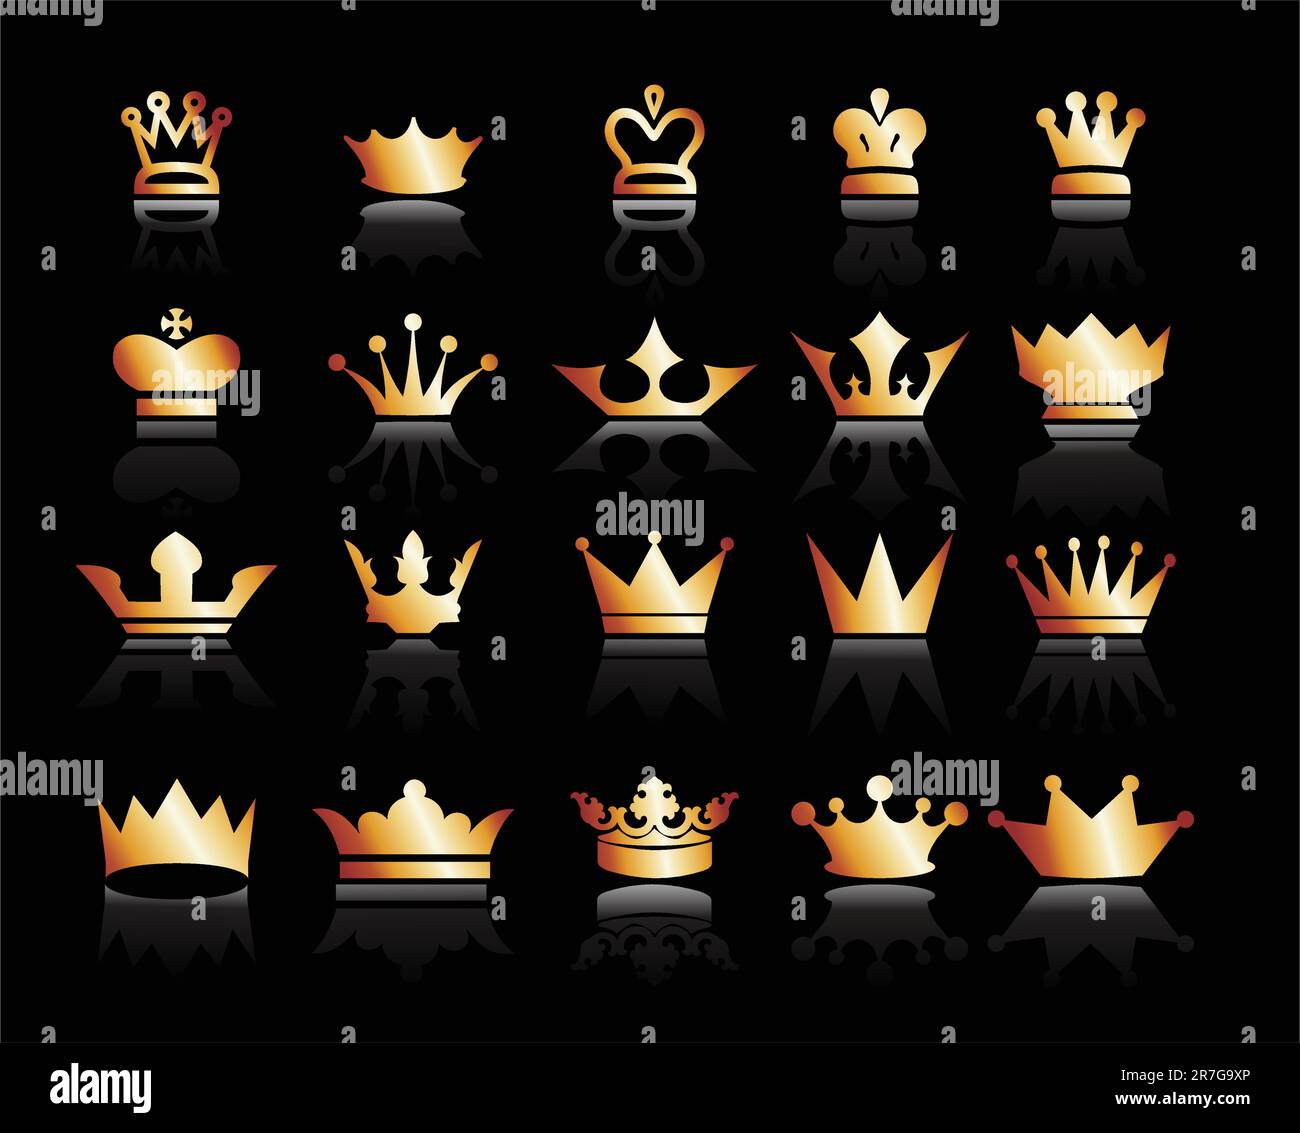 Gold crown icons set. Illustration vector Stock Vector